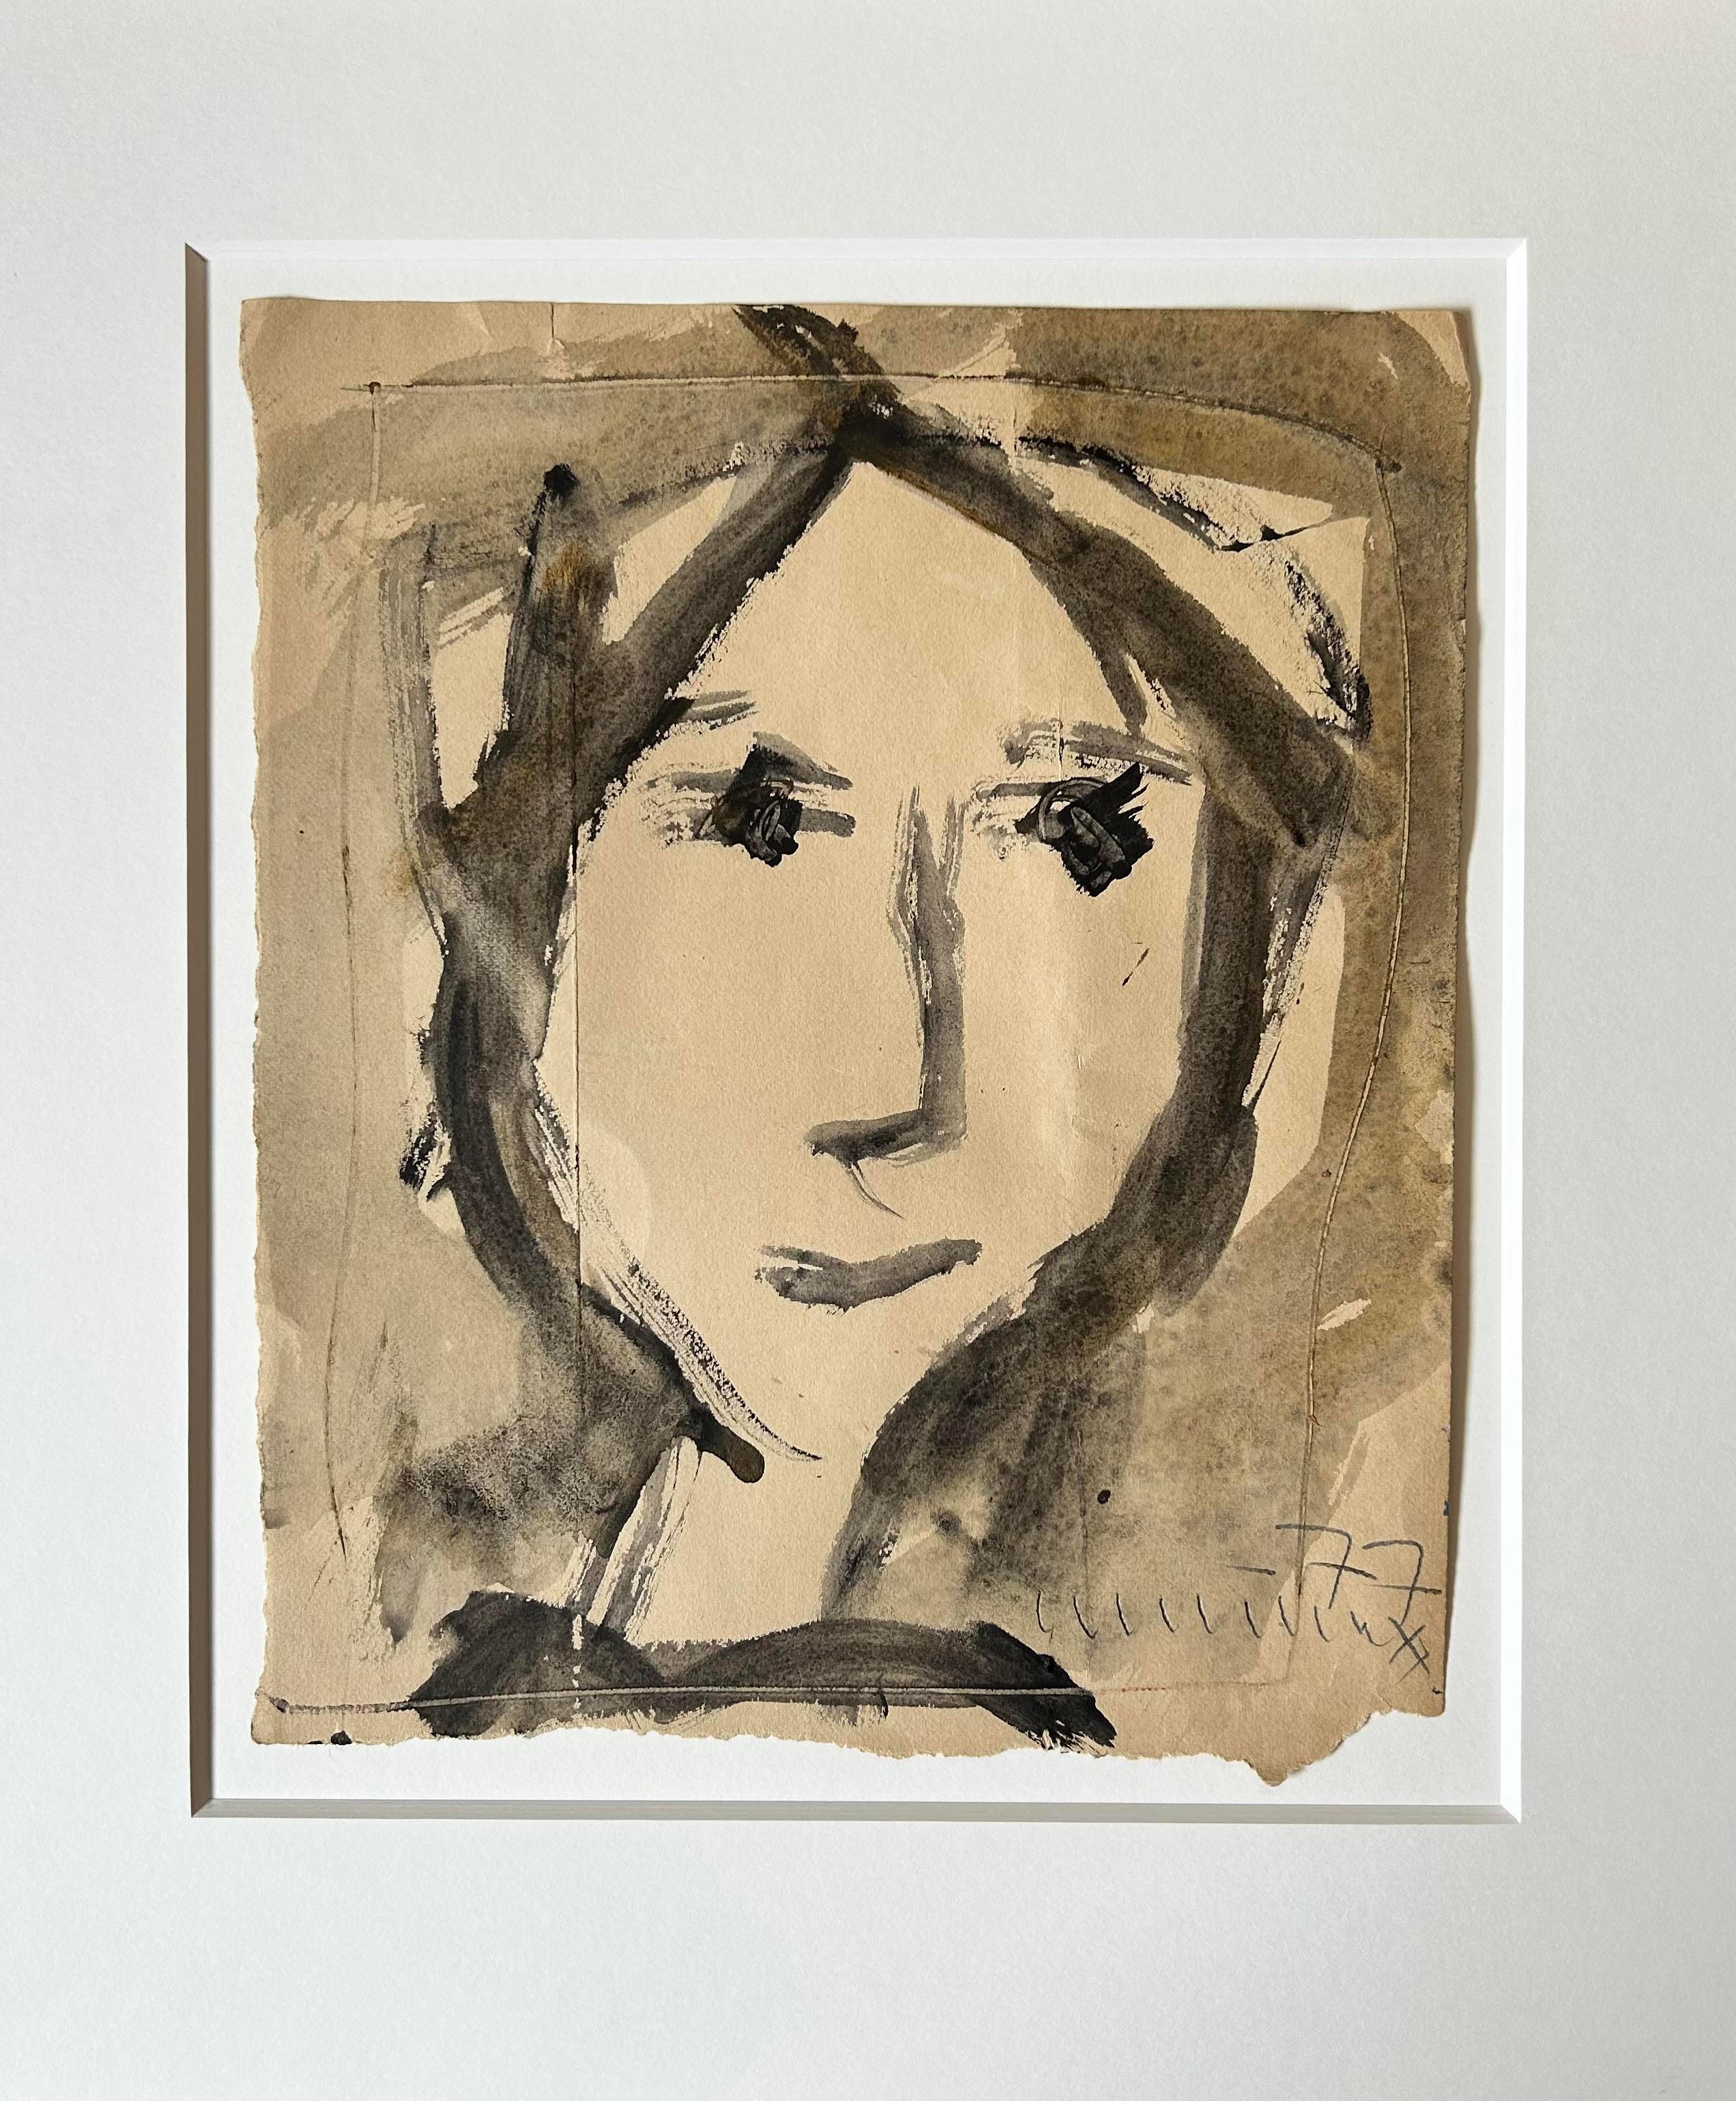 This portrait has a naïve and gentle charm to it. To my eye it looks like a woman but it could equally be any gender or age. Perhaps this is the beauty of Turner Durrant's abstraction. The materiality is more distinct when you see the piece in the